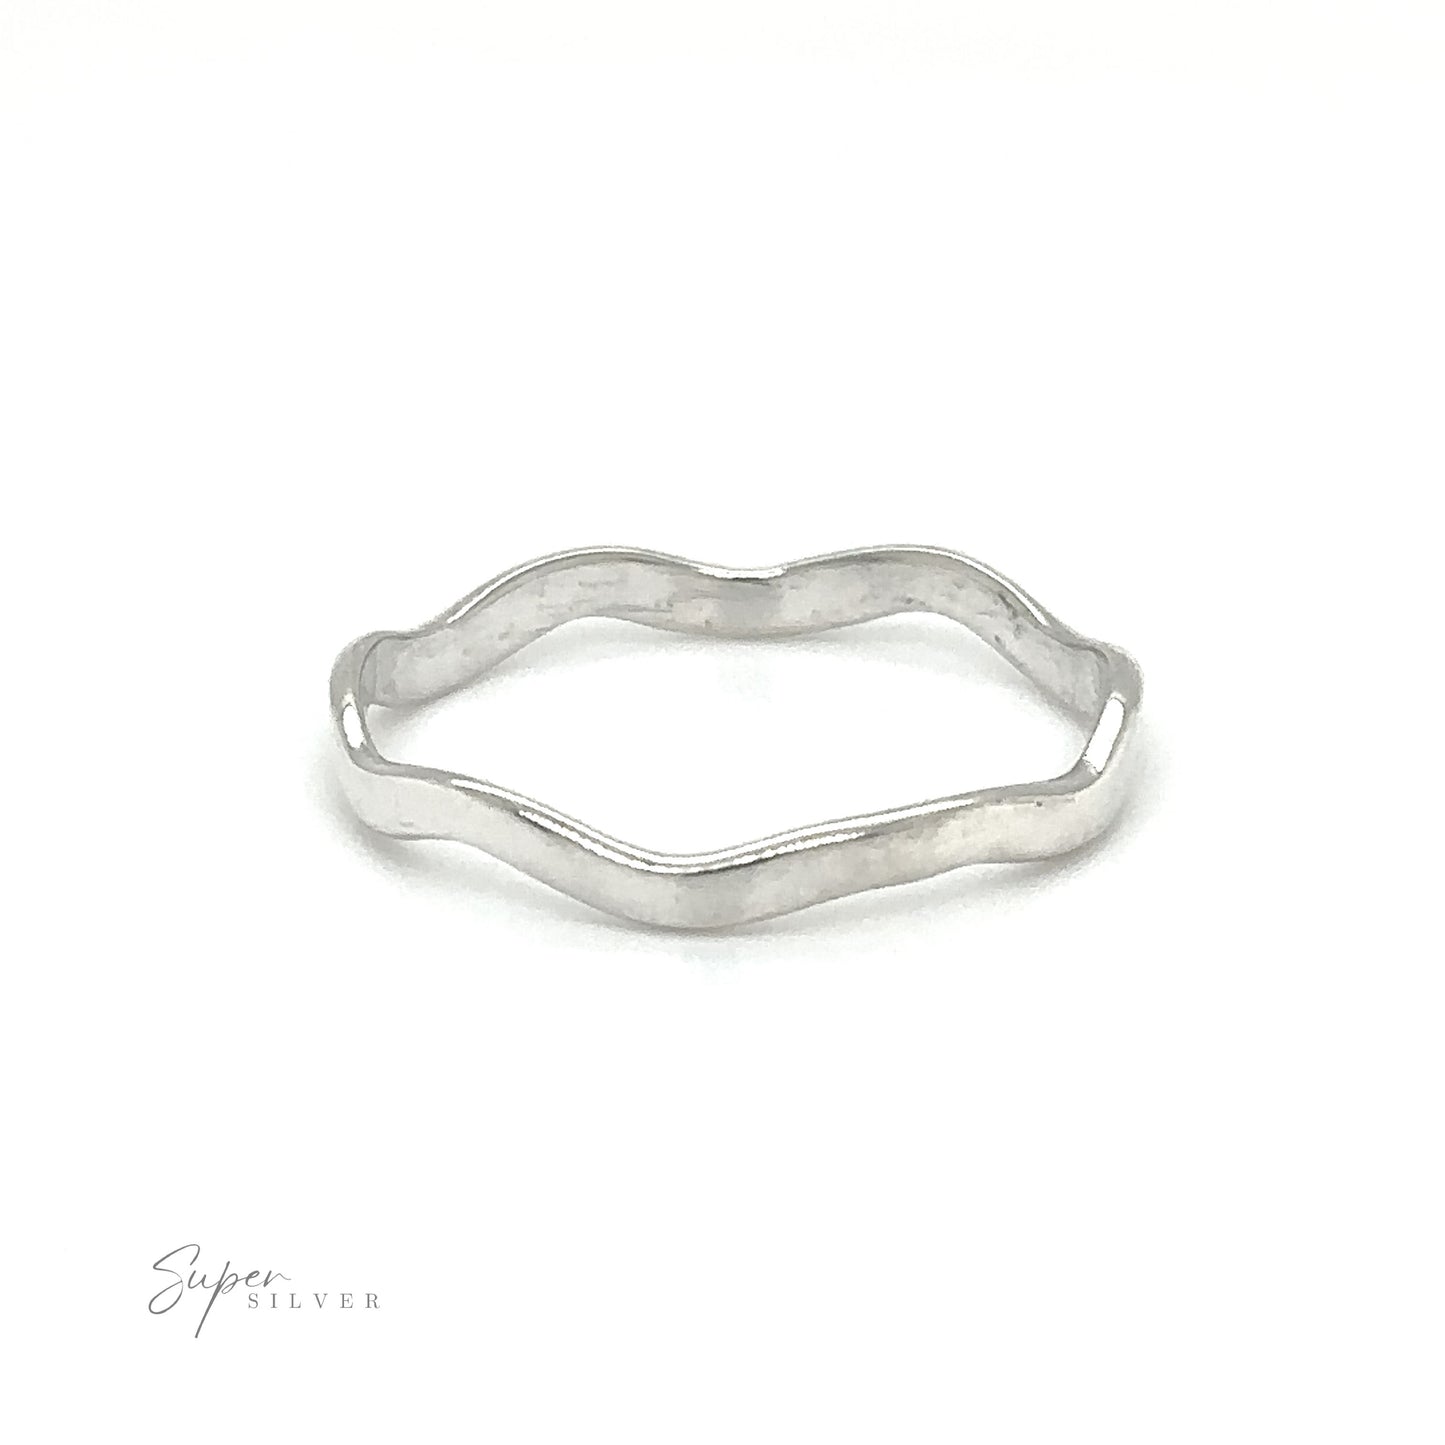 A Wavy Silver Band with a simple wavy band.